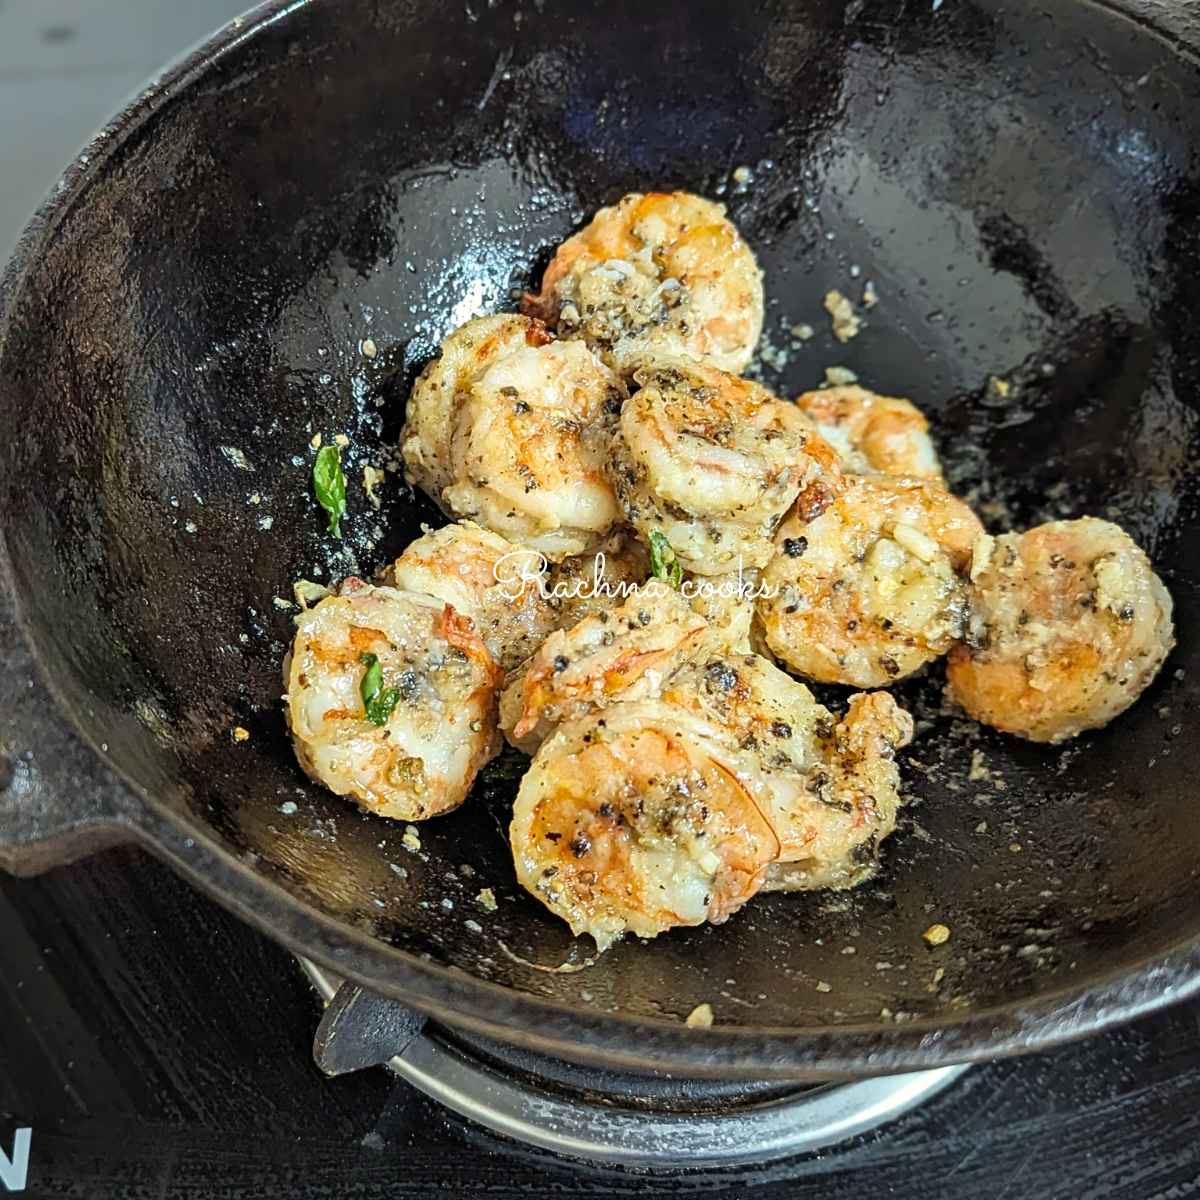 Salt and pepper shrimp after tossing in garlic and chilli oil